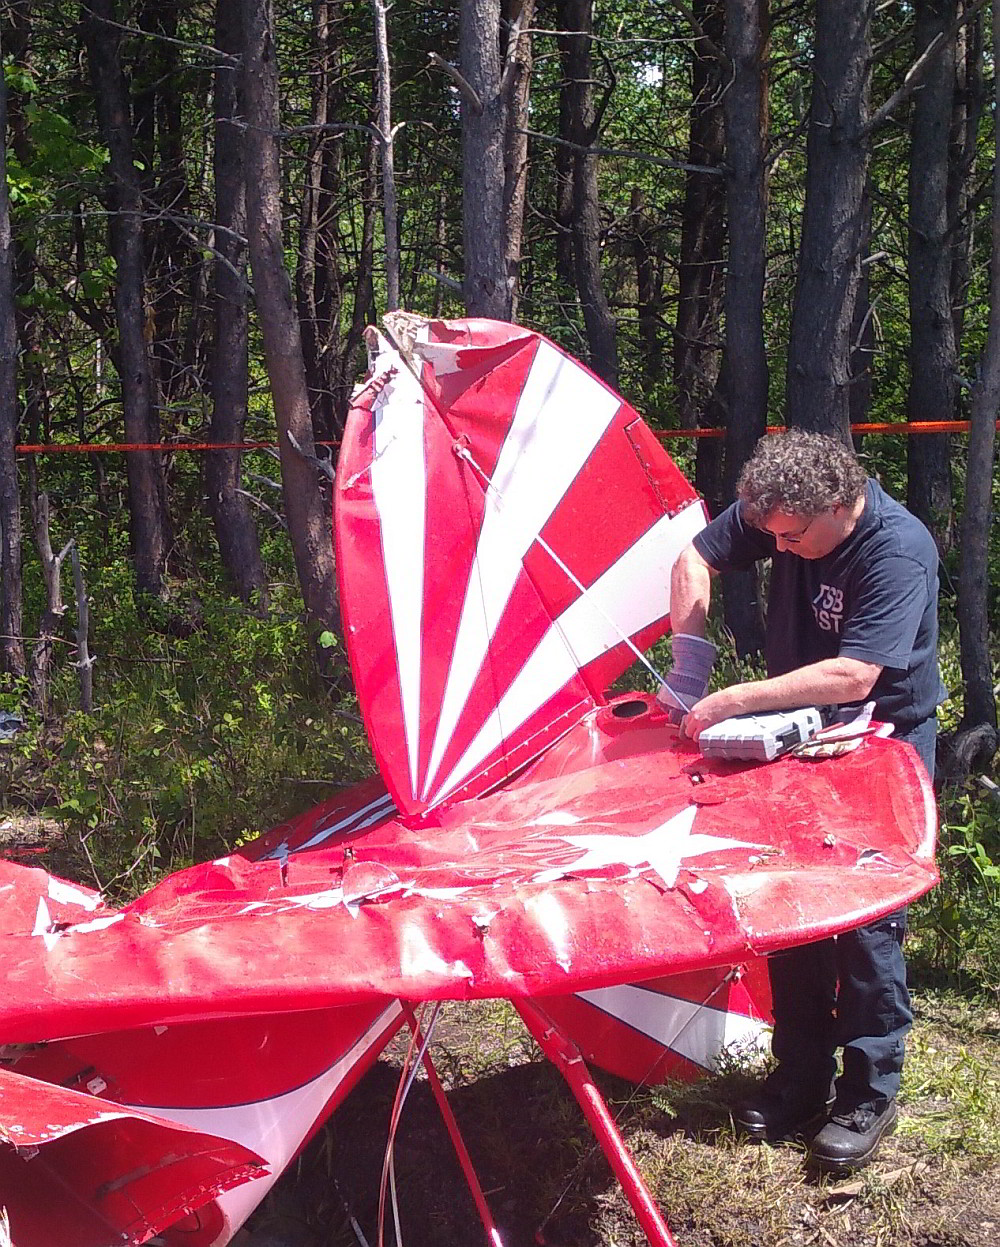 TSB investigator examining the wreckage of a Pitts S2E aircraft following an accident in Saint-Jean-Port-Joli, Quebec